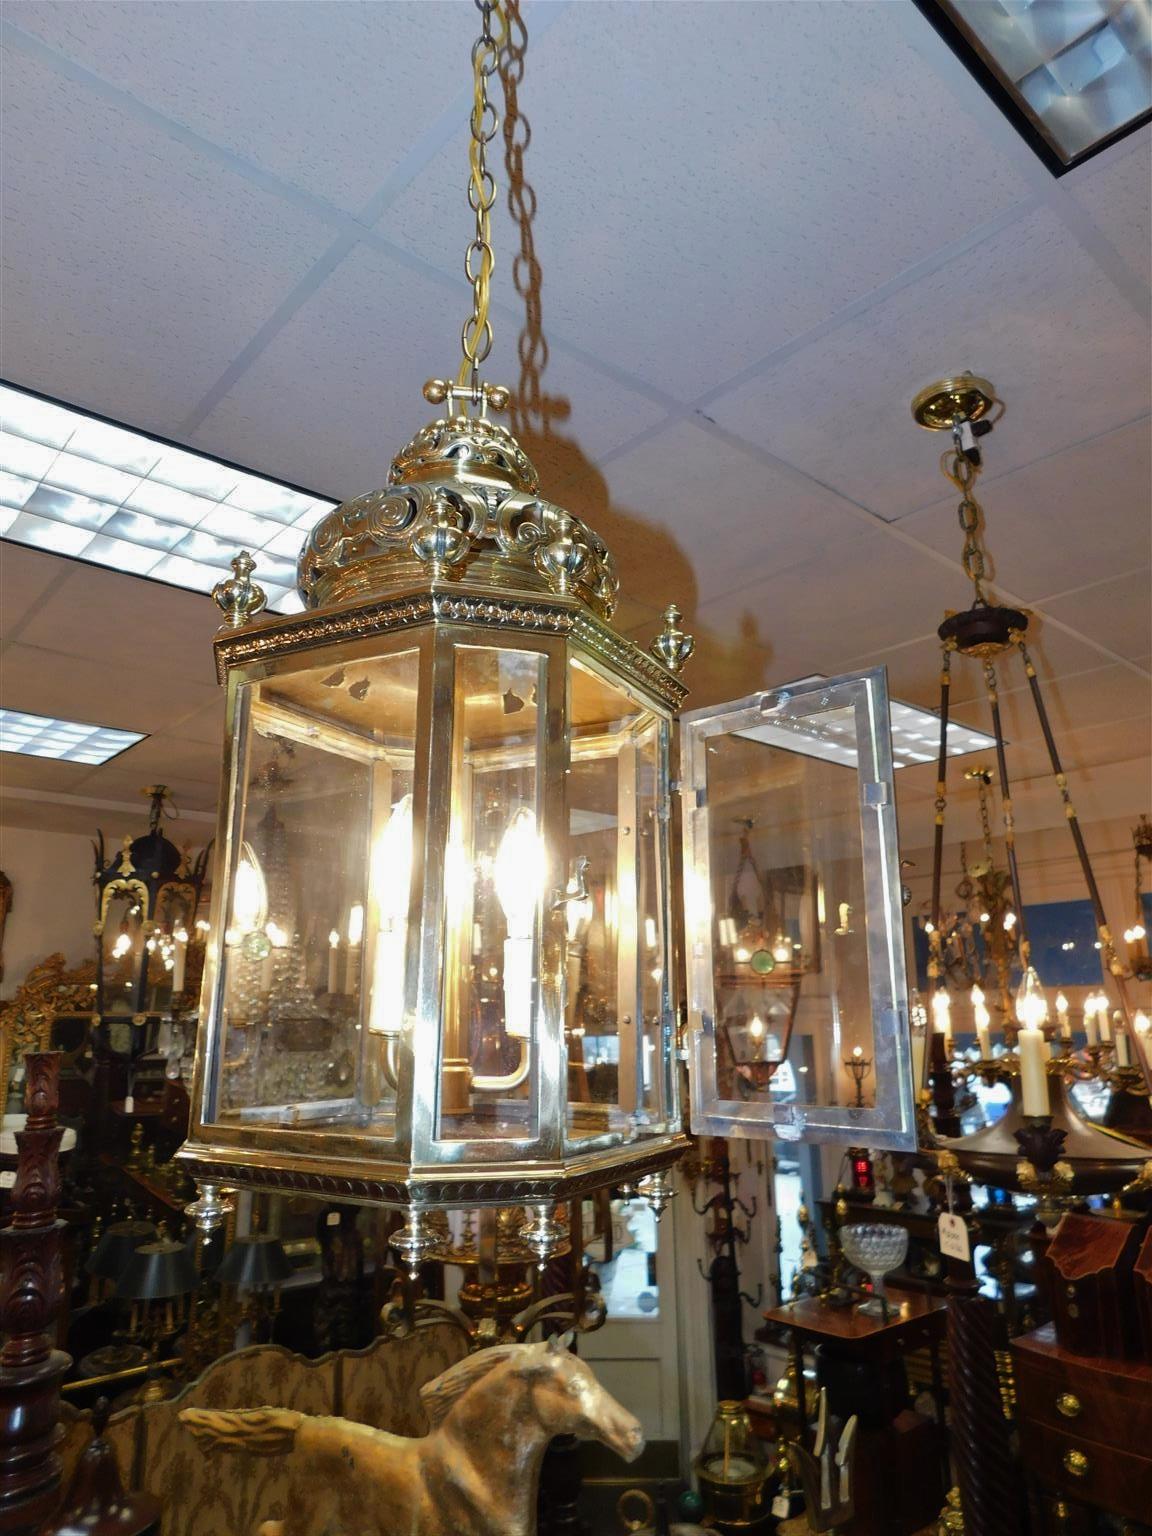 Early 19th Century English Brass Octagon Decorative Chased Dome Glass Hall Lantern, Circa 1820 For Sale